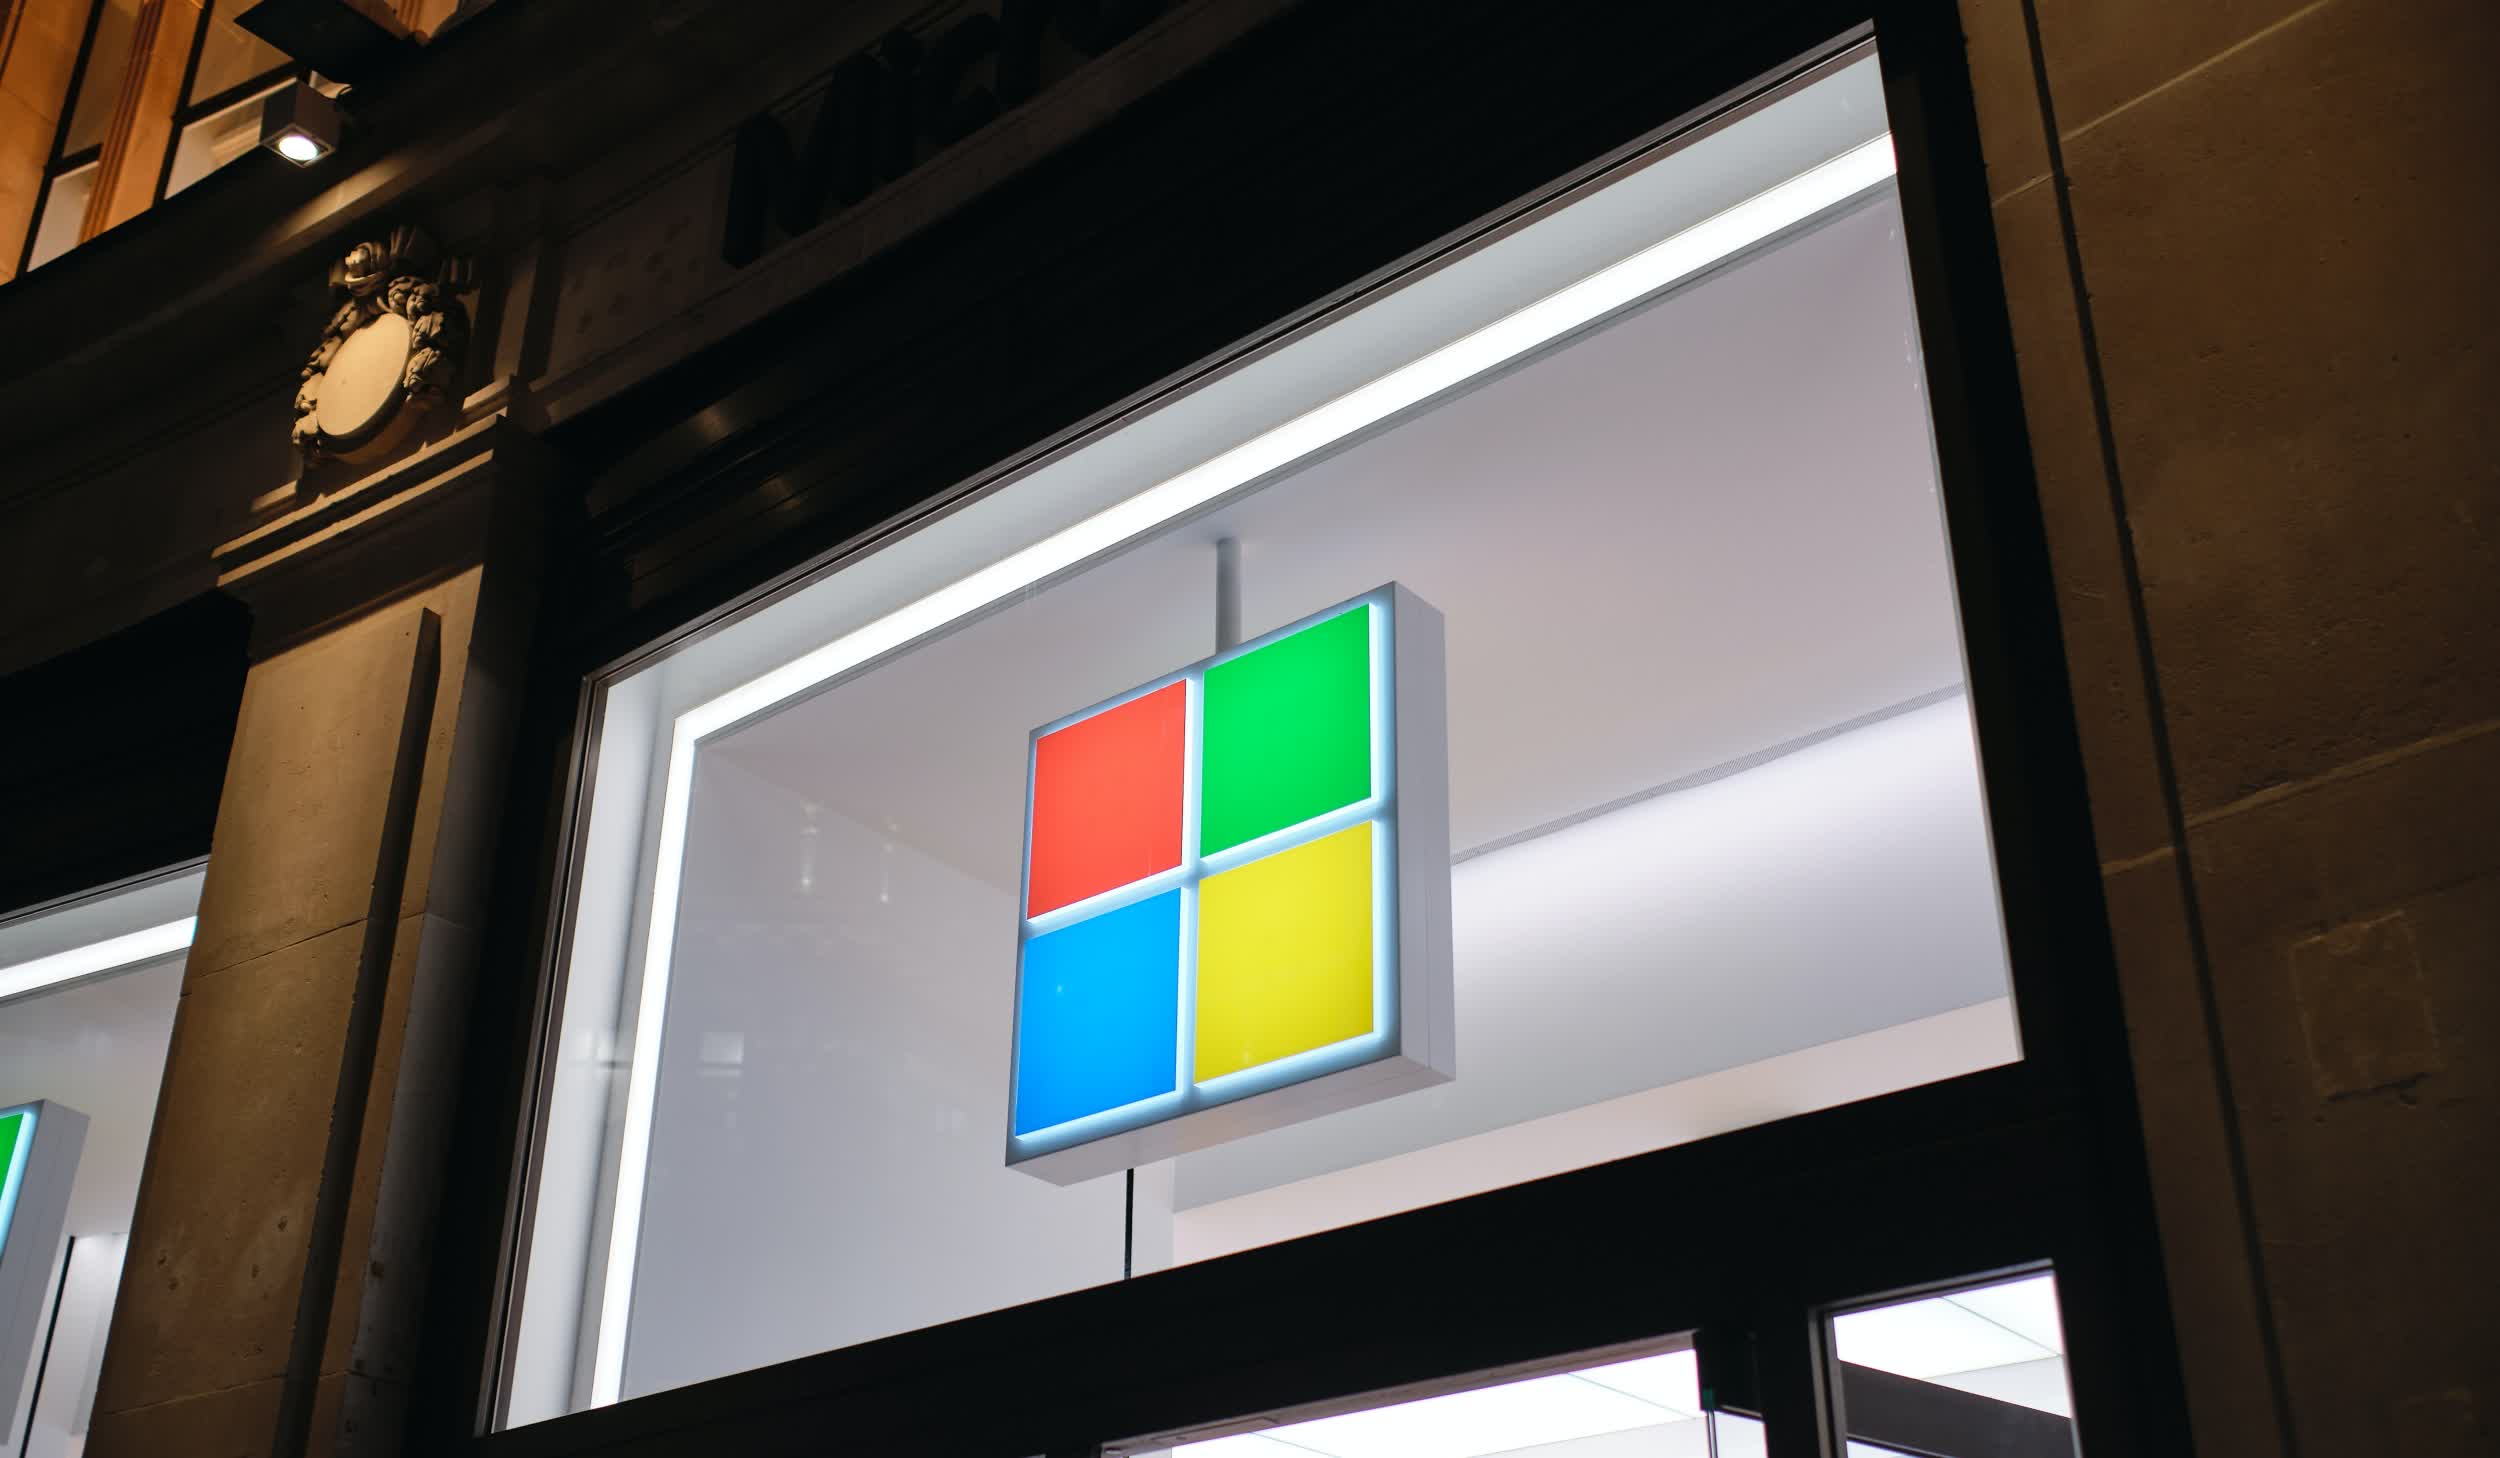 Microsoft confirms hacking group stole source code via 'limited access'